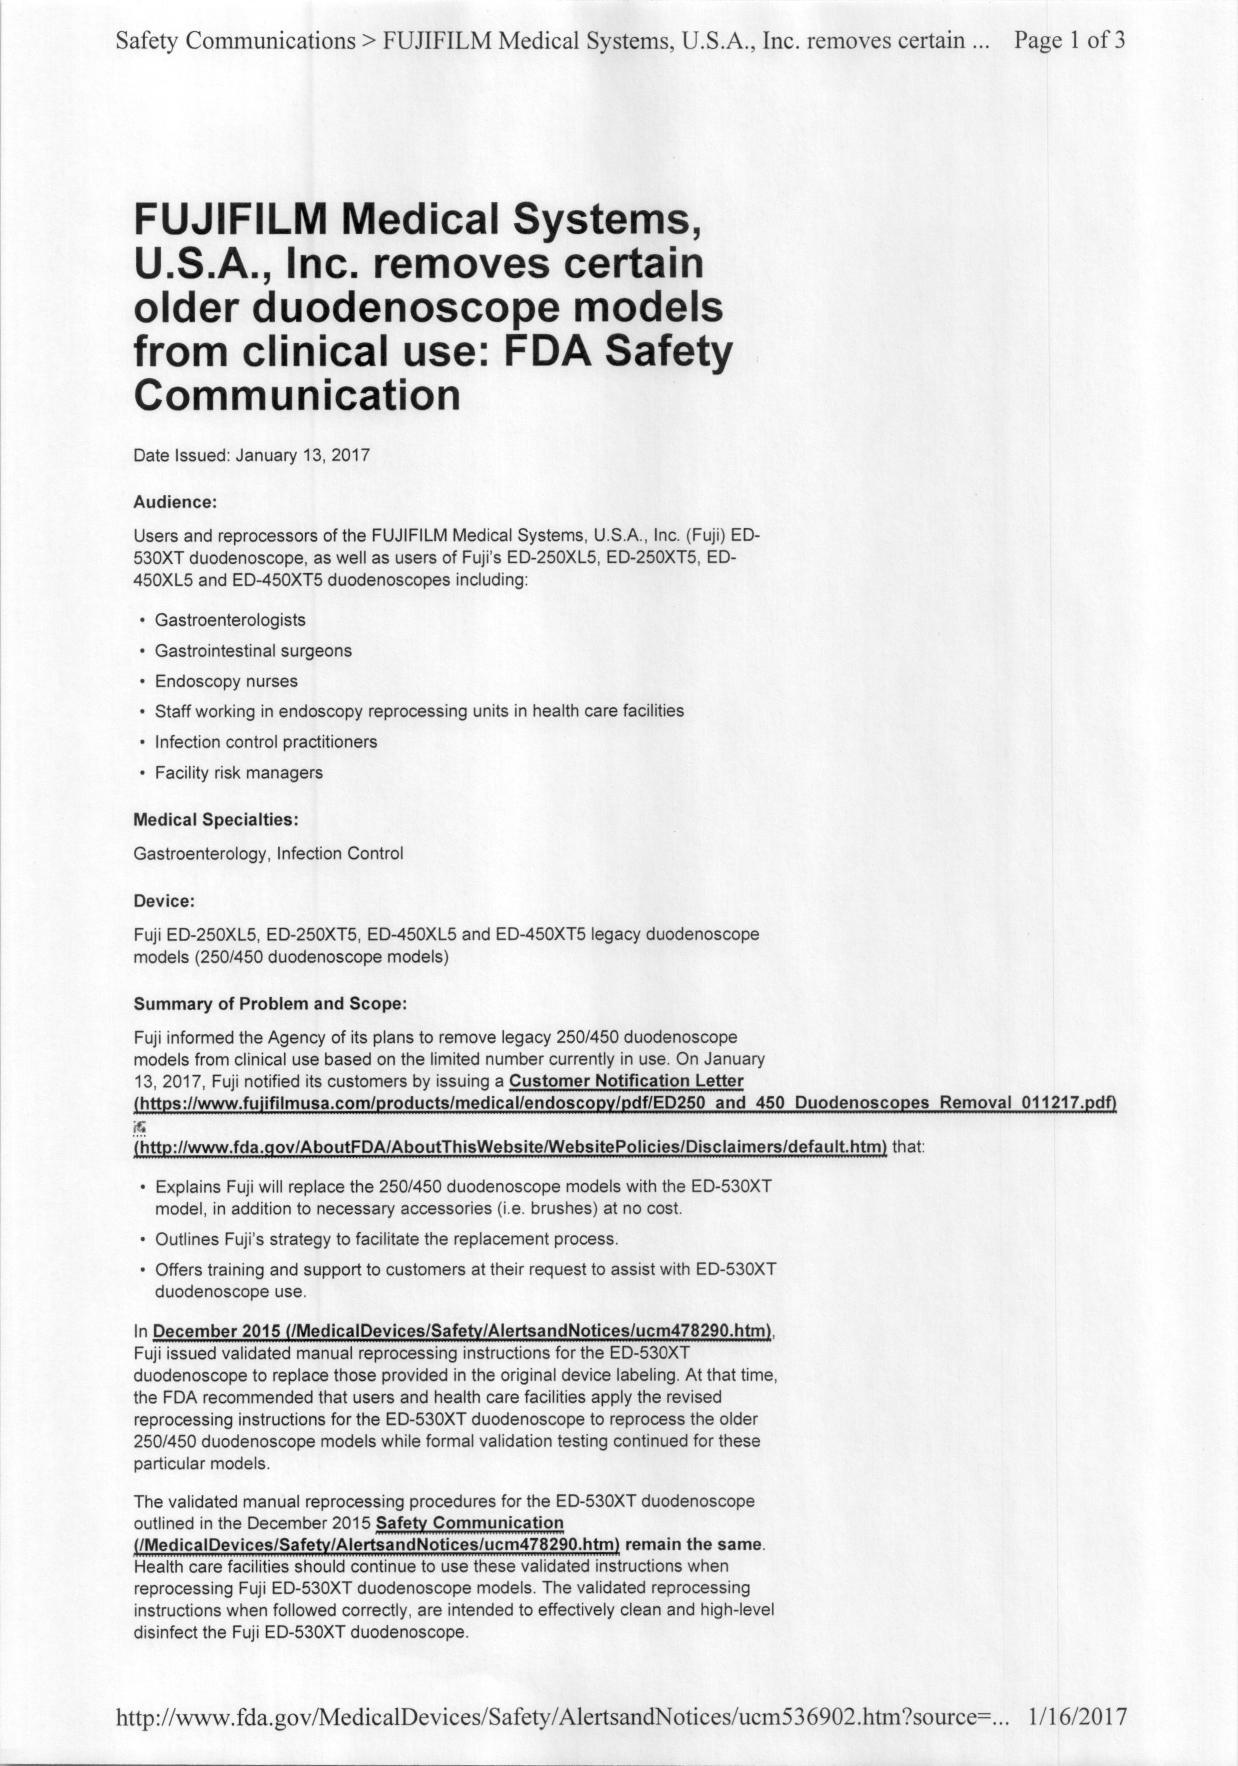 fujifilm-medical-systems-usa-inc-removes-certain-older-duodenoscope-models-from-clinical-use-fda-safety-communication.pdf